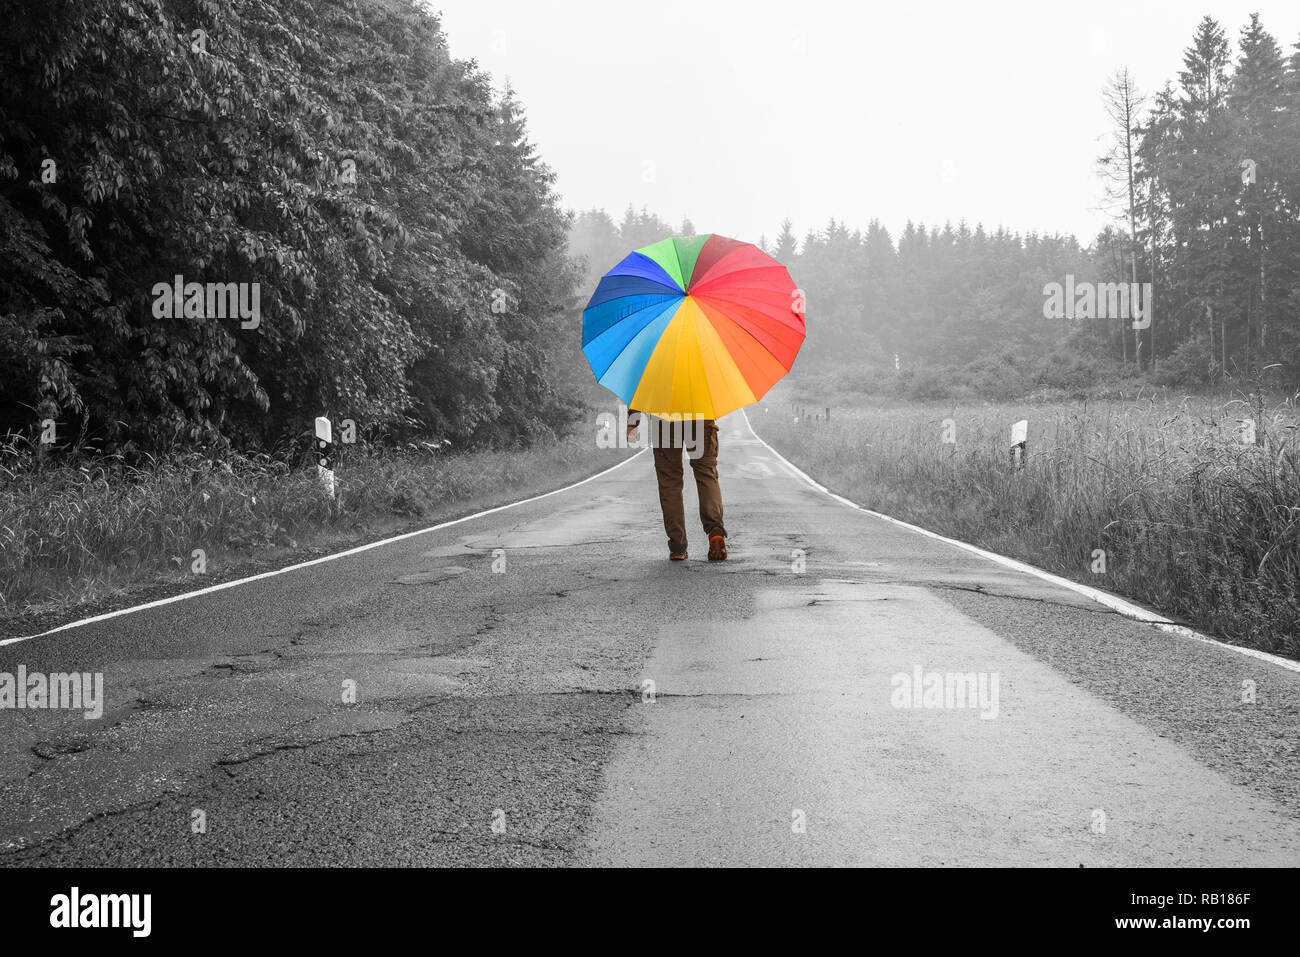 person with big colored umbrella walking on a road, monochrome view Stock Photo